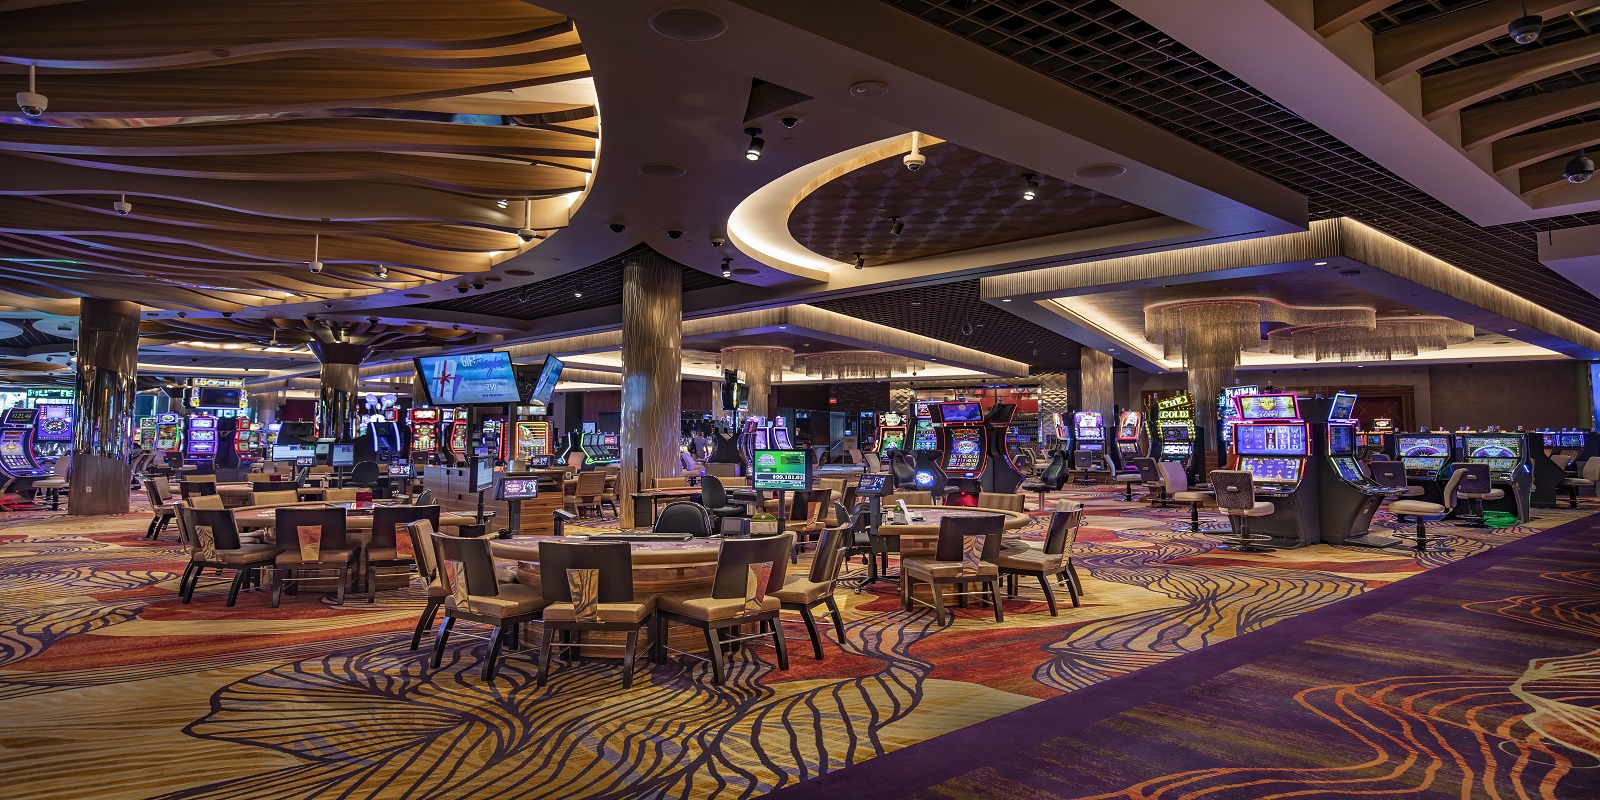 SAHARA remodeled casino floor with slot machines and blackjack tables